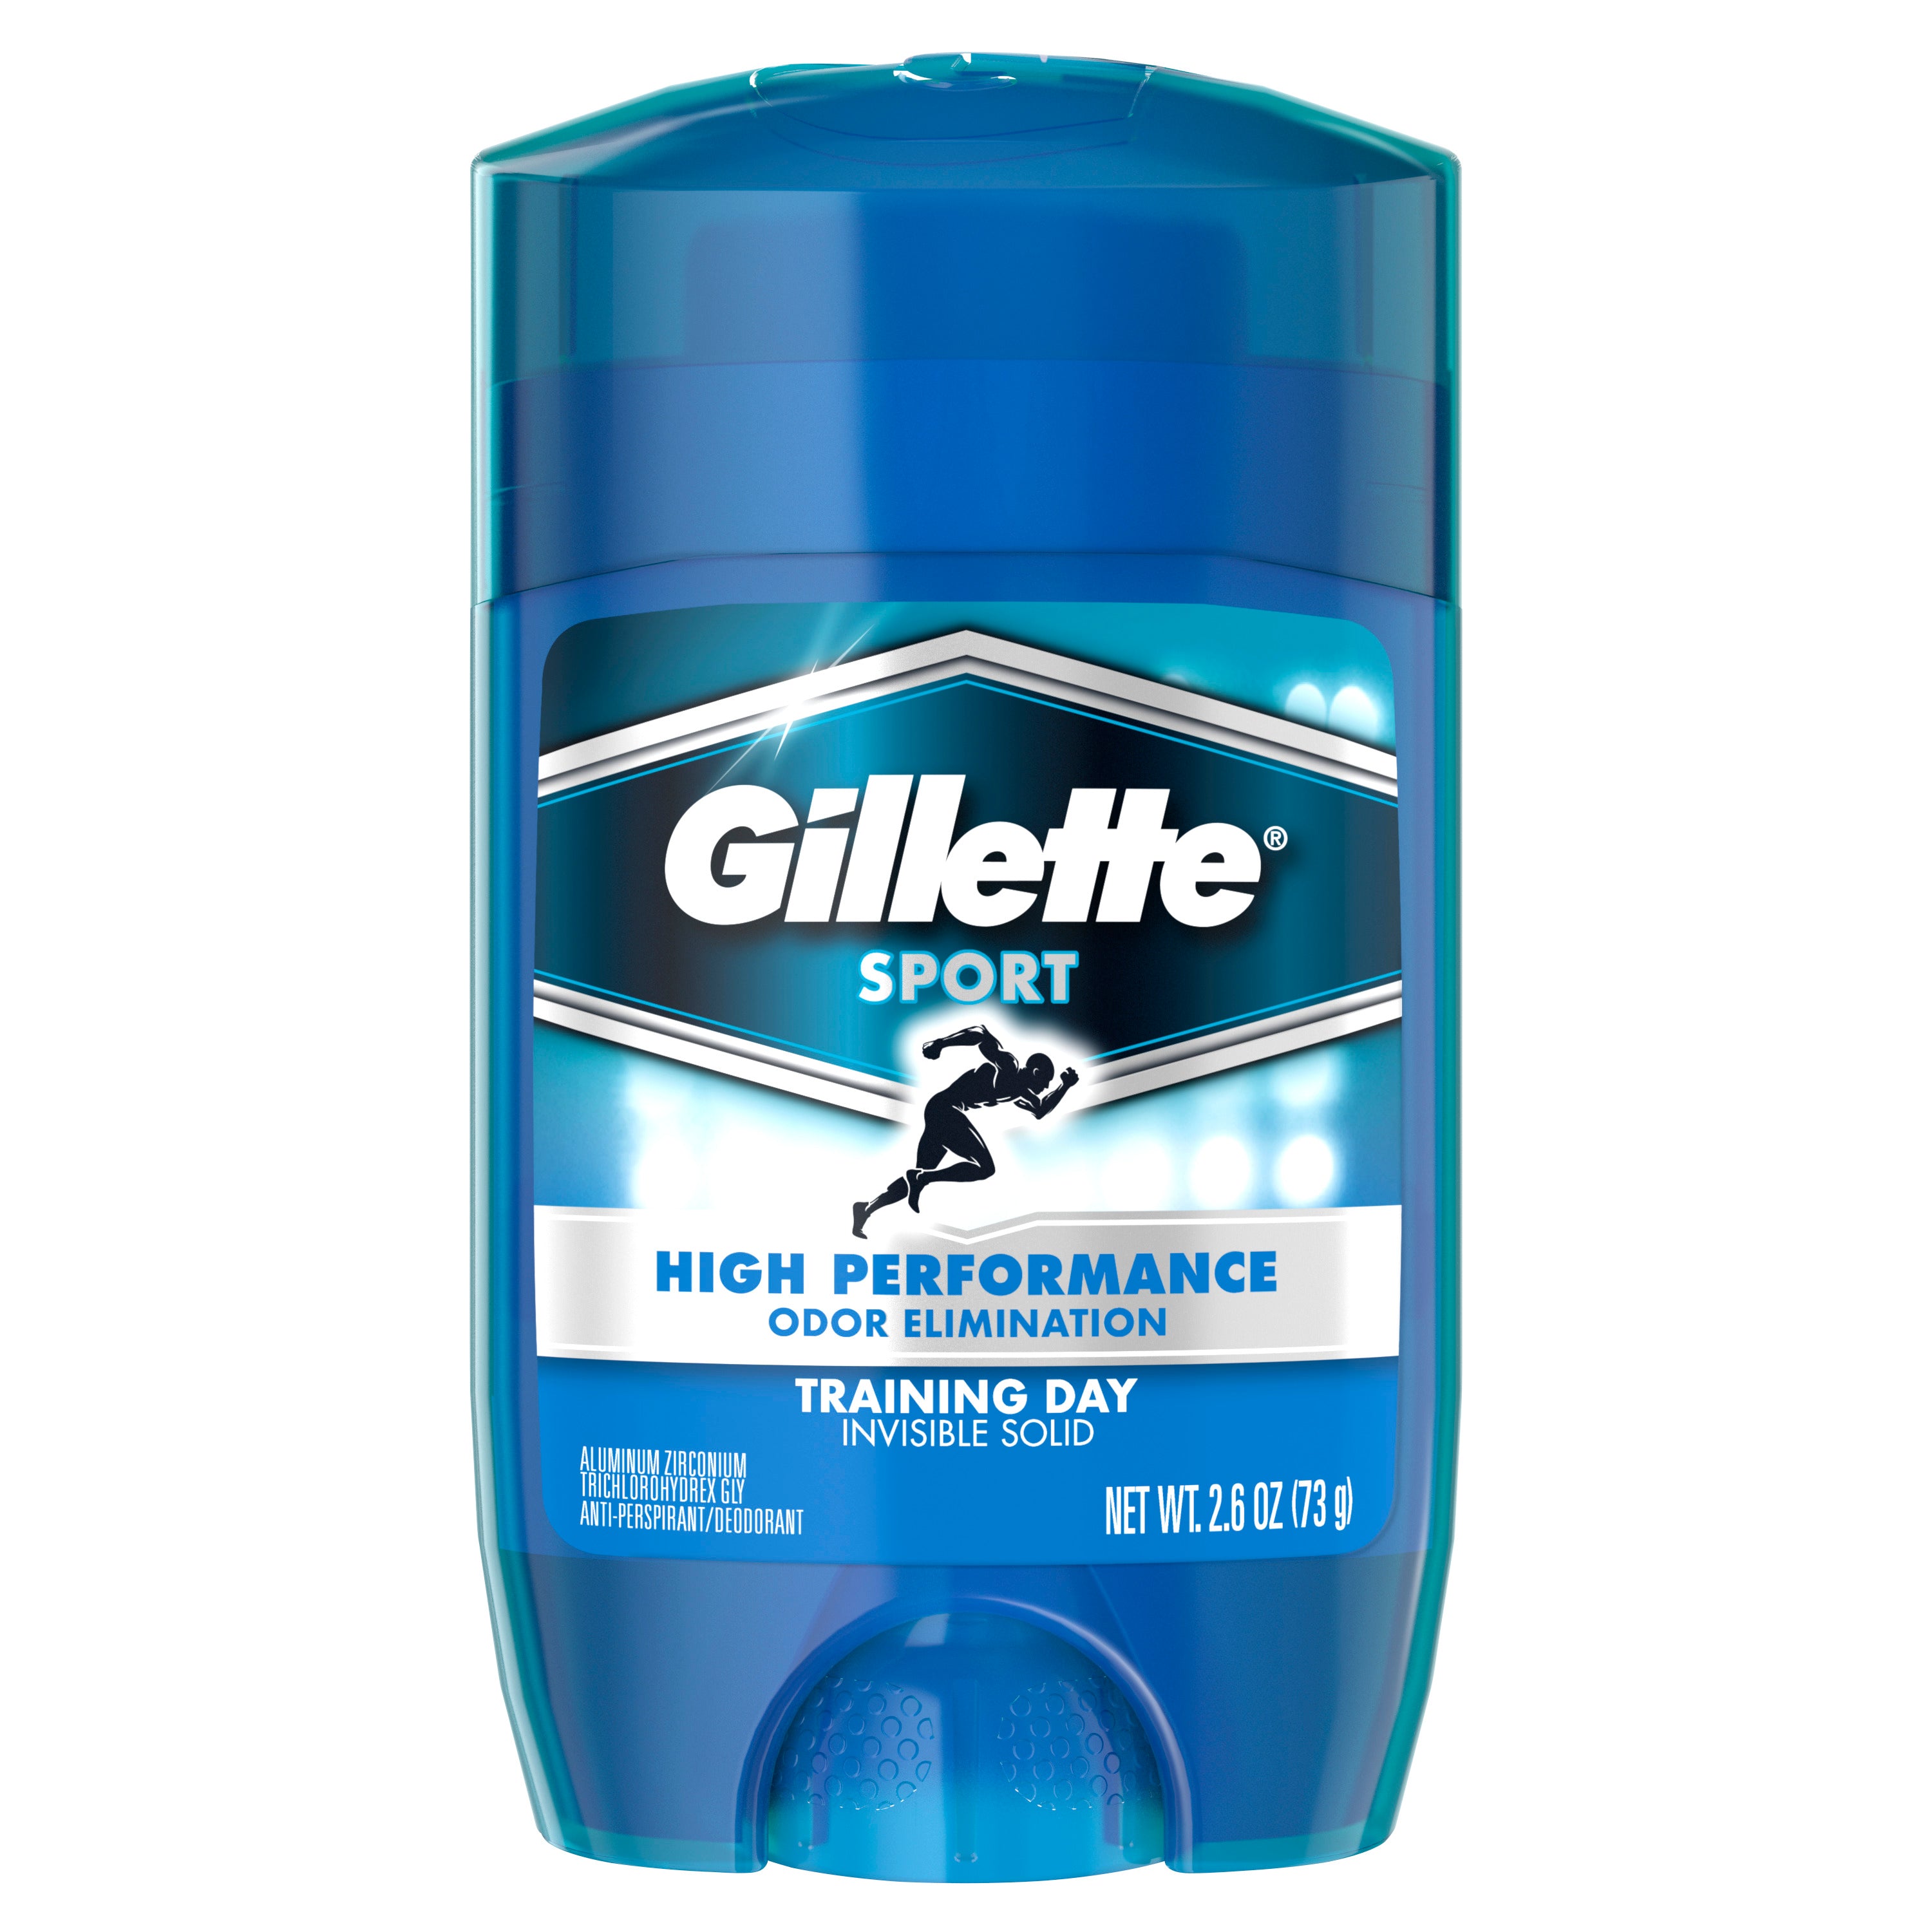 Gillette Sport HP Odor Elimination Invisible Solid Training Day Scent - 2.6oz/12pk